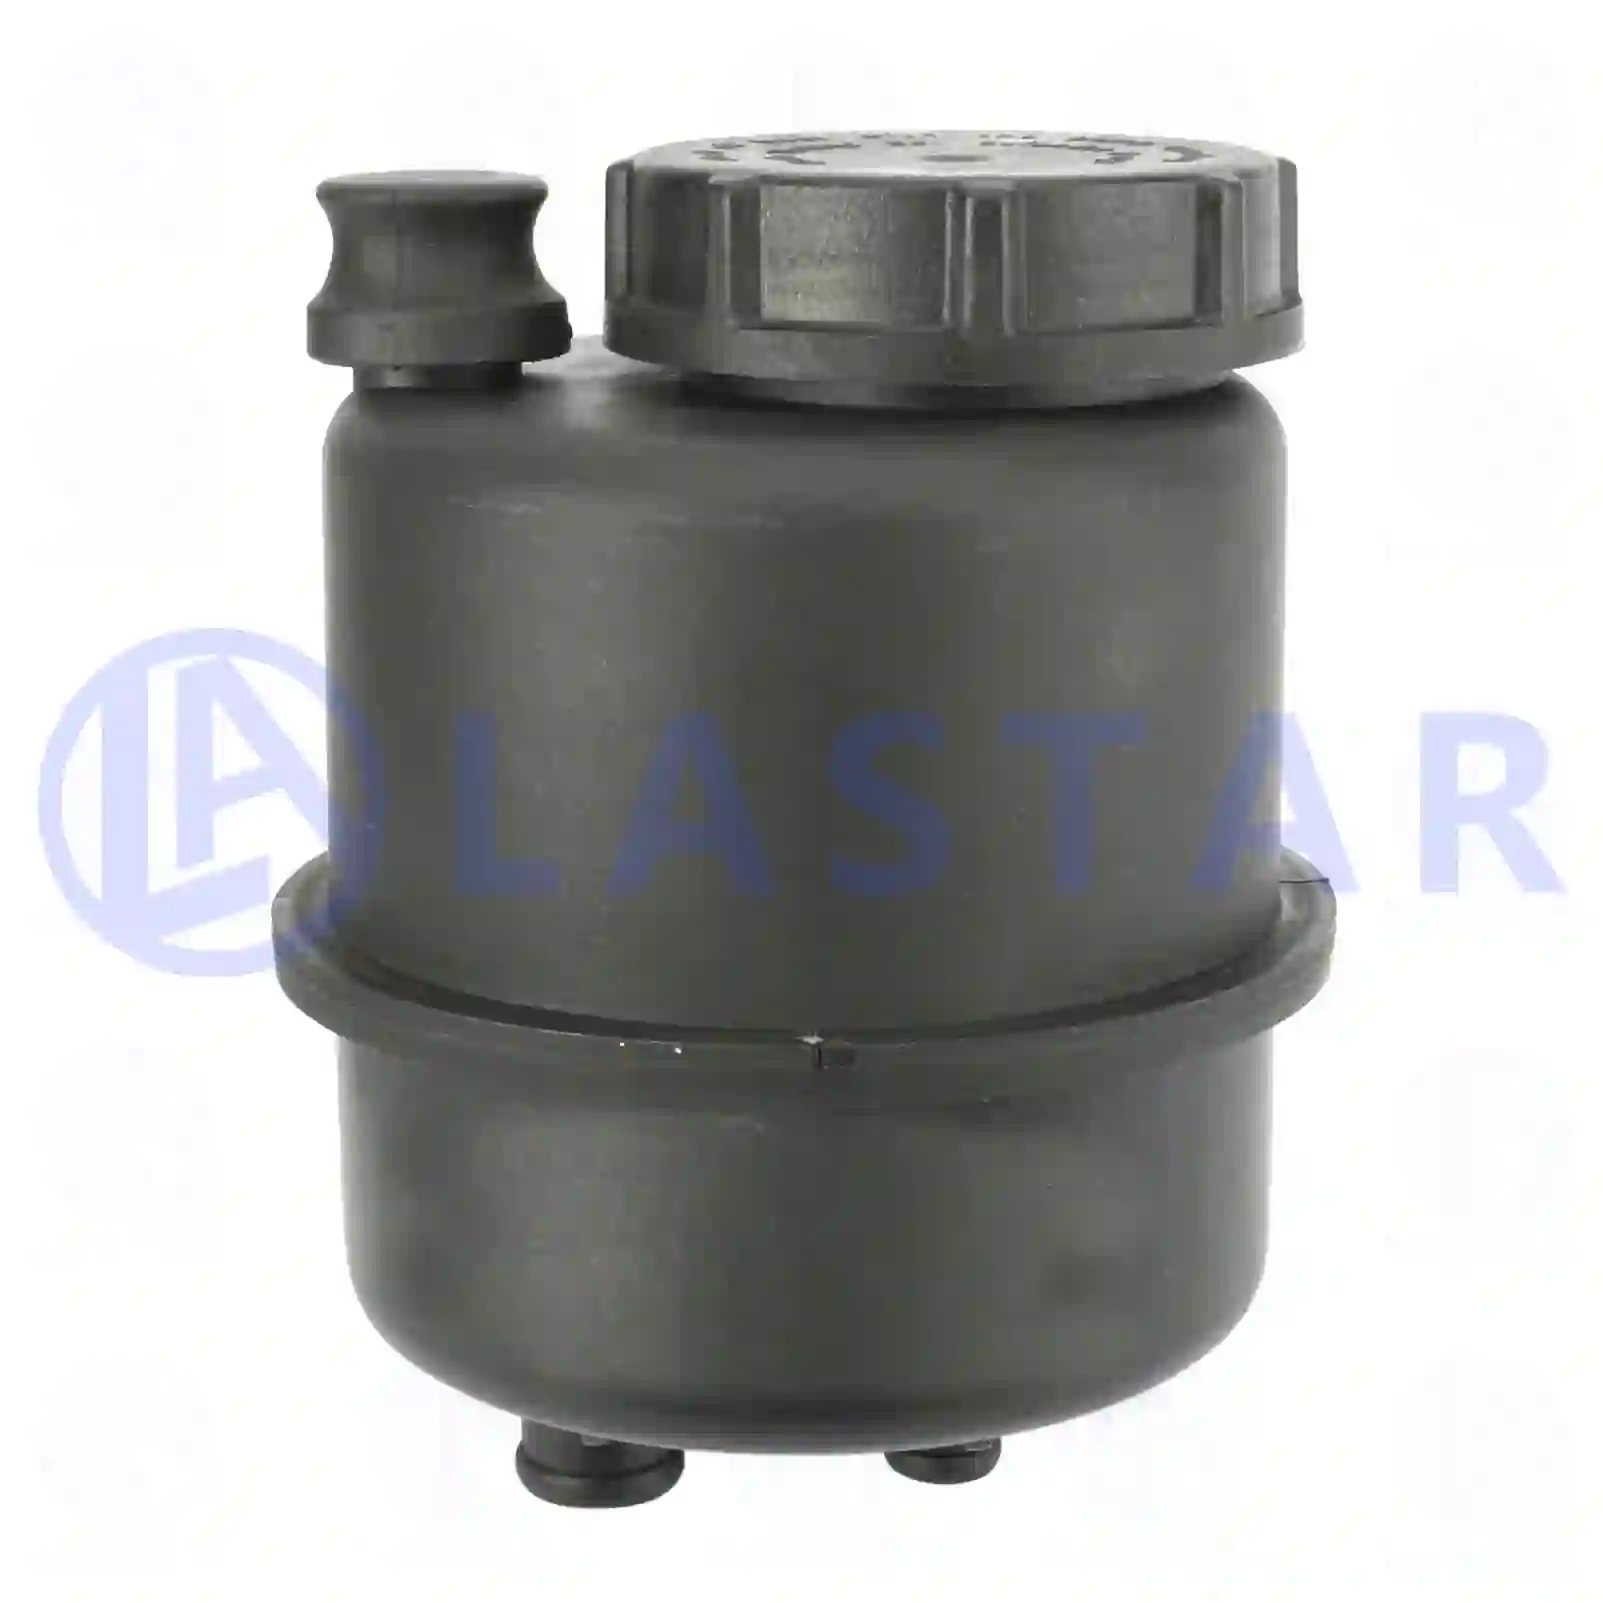 Oil Container, Steering Oil container, with filter, la no: 77705225 ,  oem no:0274965, 274965, RAK3233, 655644, 1017435, 3600254000, 42548853, 61585775, 93193415, 93805623, 81473016030, 85400003315, N1011019621, 0004663802, 0004664502, 0004665502, 0004666202, 49180-D8800, RAK3233, 5000791018, 7401592945, 1327382, 297353, 318533, 524094, 40070, 1794020171, 1794120900, J1794020171, 281473016030, 20210531, 274965, 1592945, ZG03042-0008 Lastar Spare Part | Truck Spare Parts, Auotomotive Spare Parts